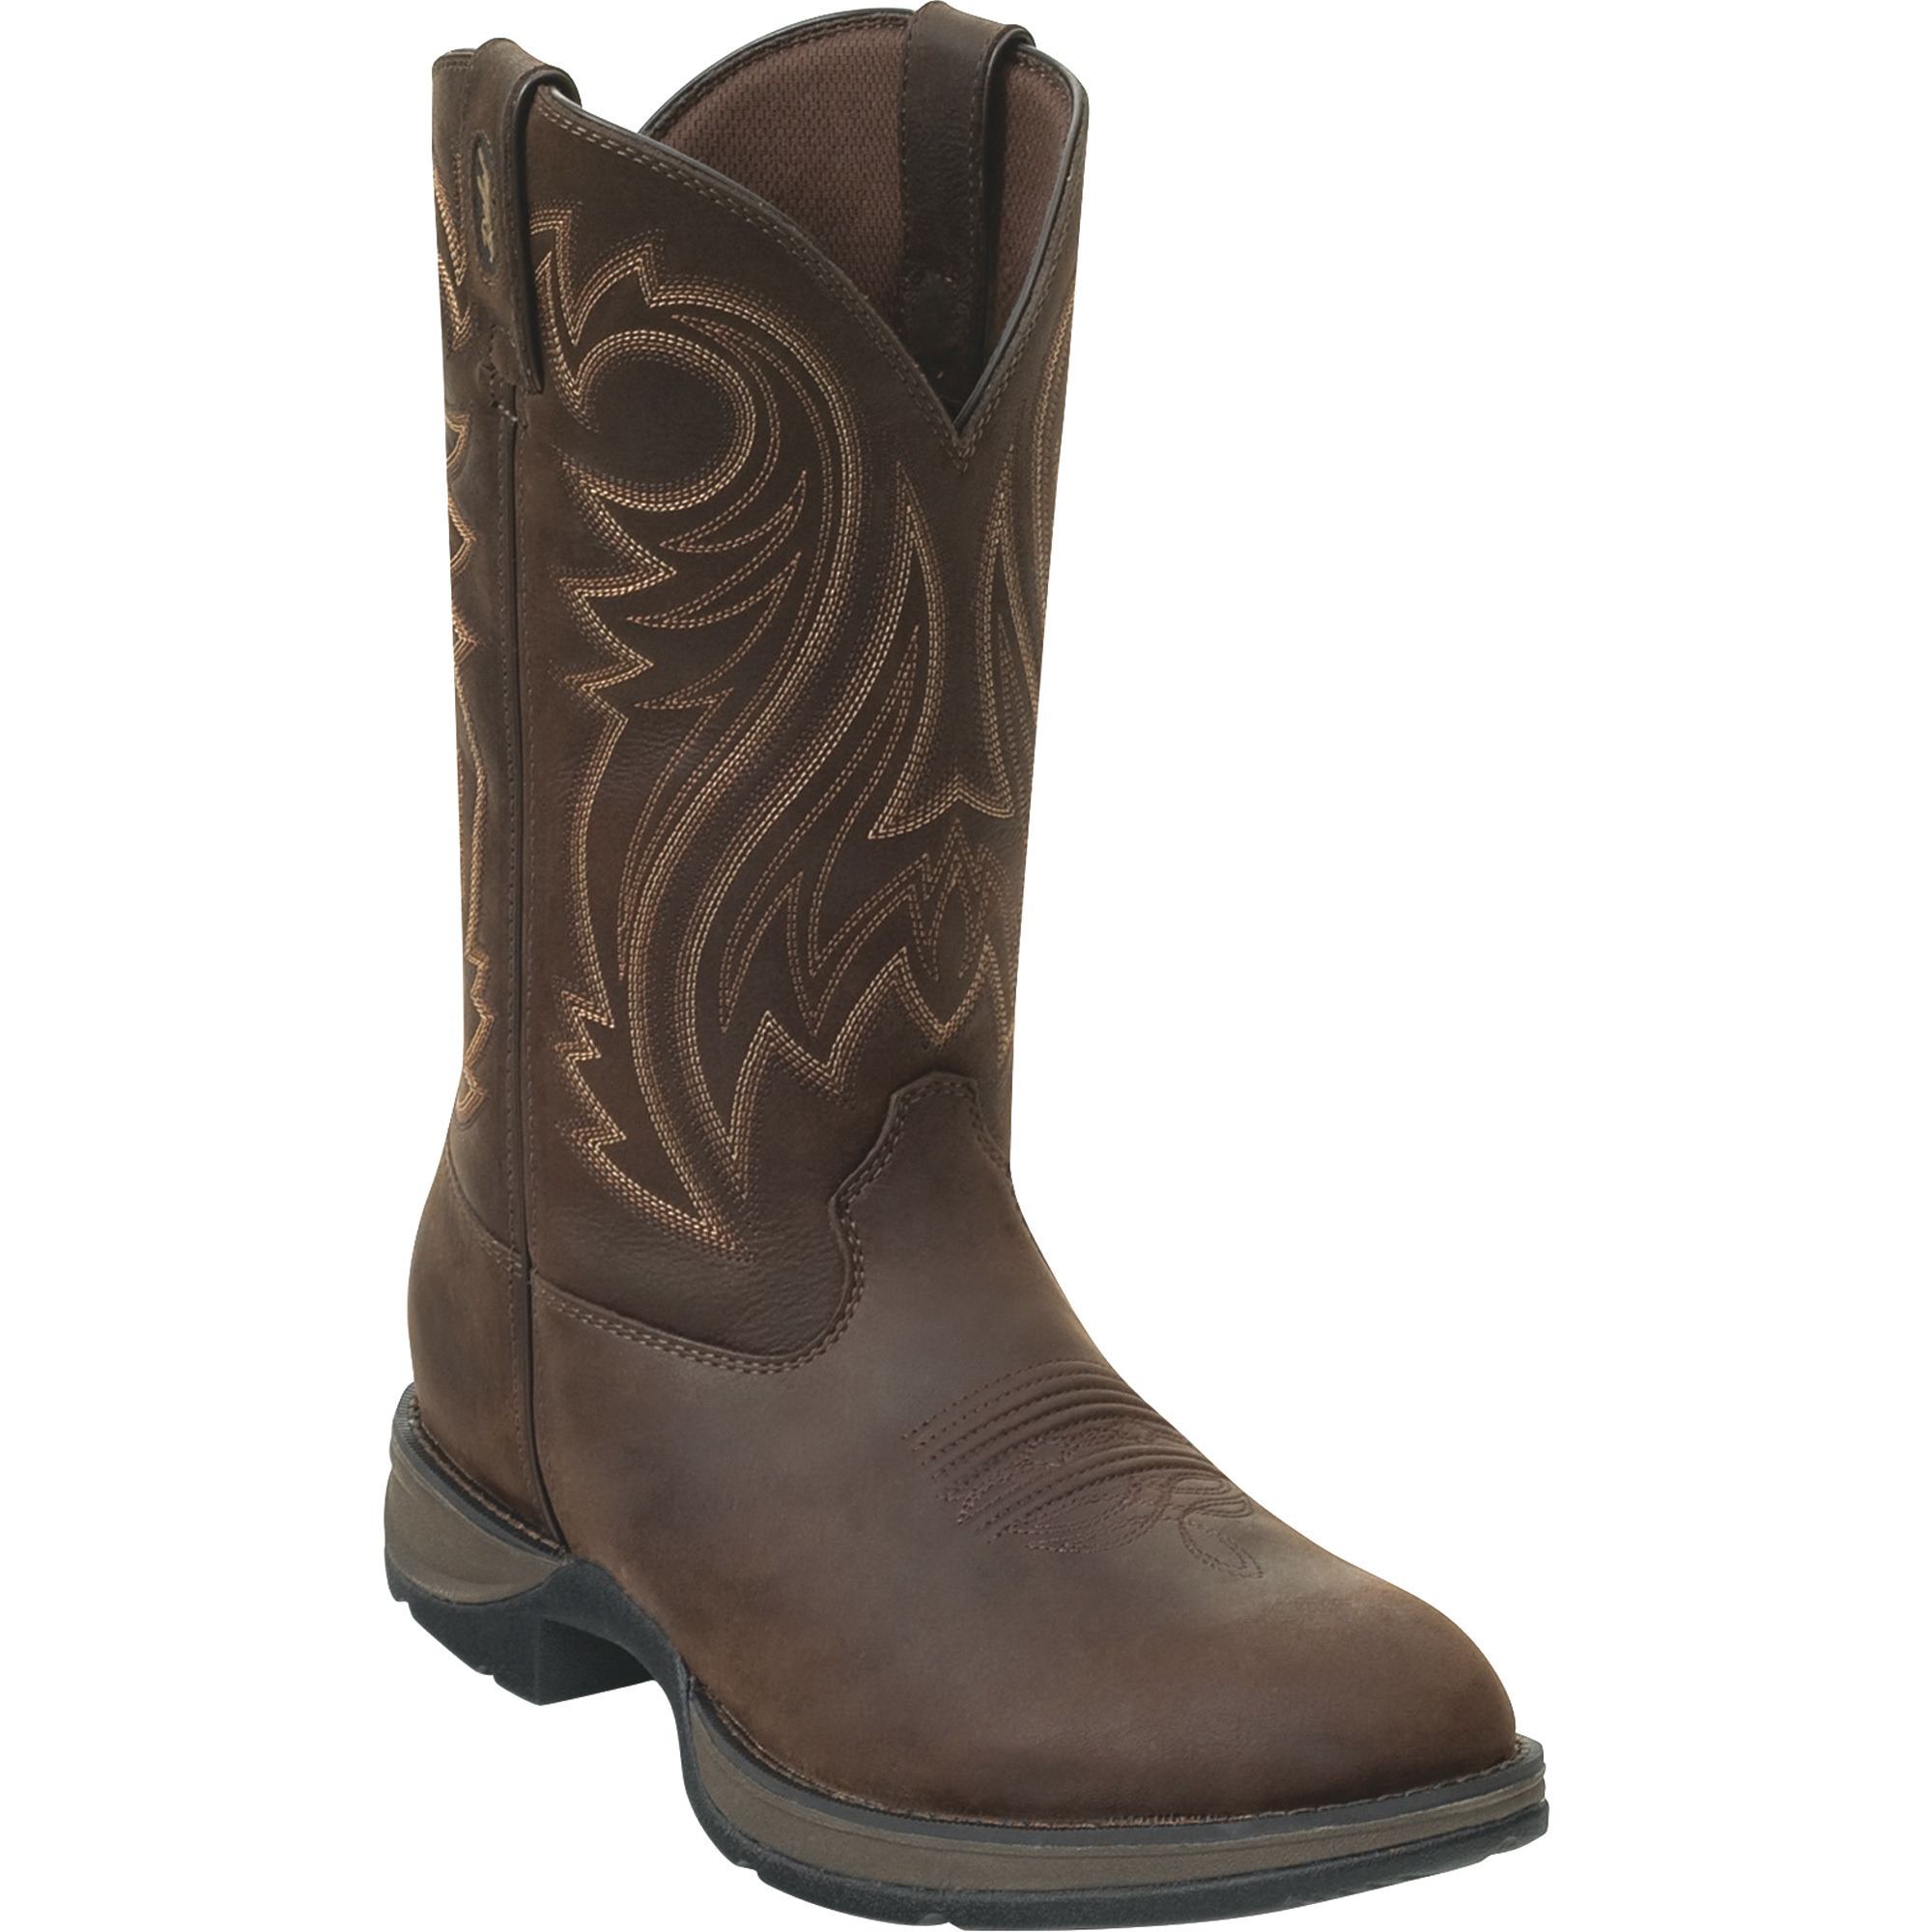 Durango Men's Rebel 12Inch Pull-On Western Boot - Chocolate, Size 10 Wide, Model DB 5464